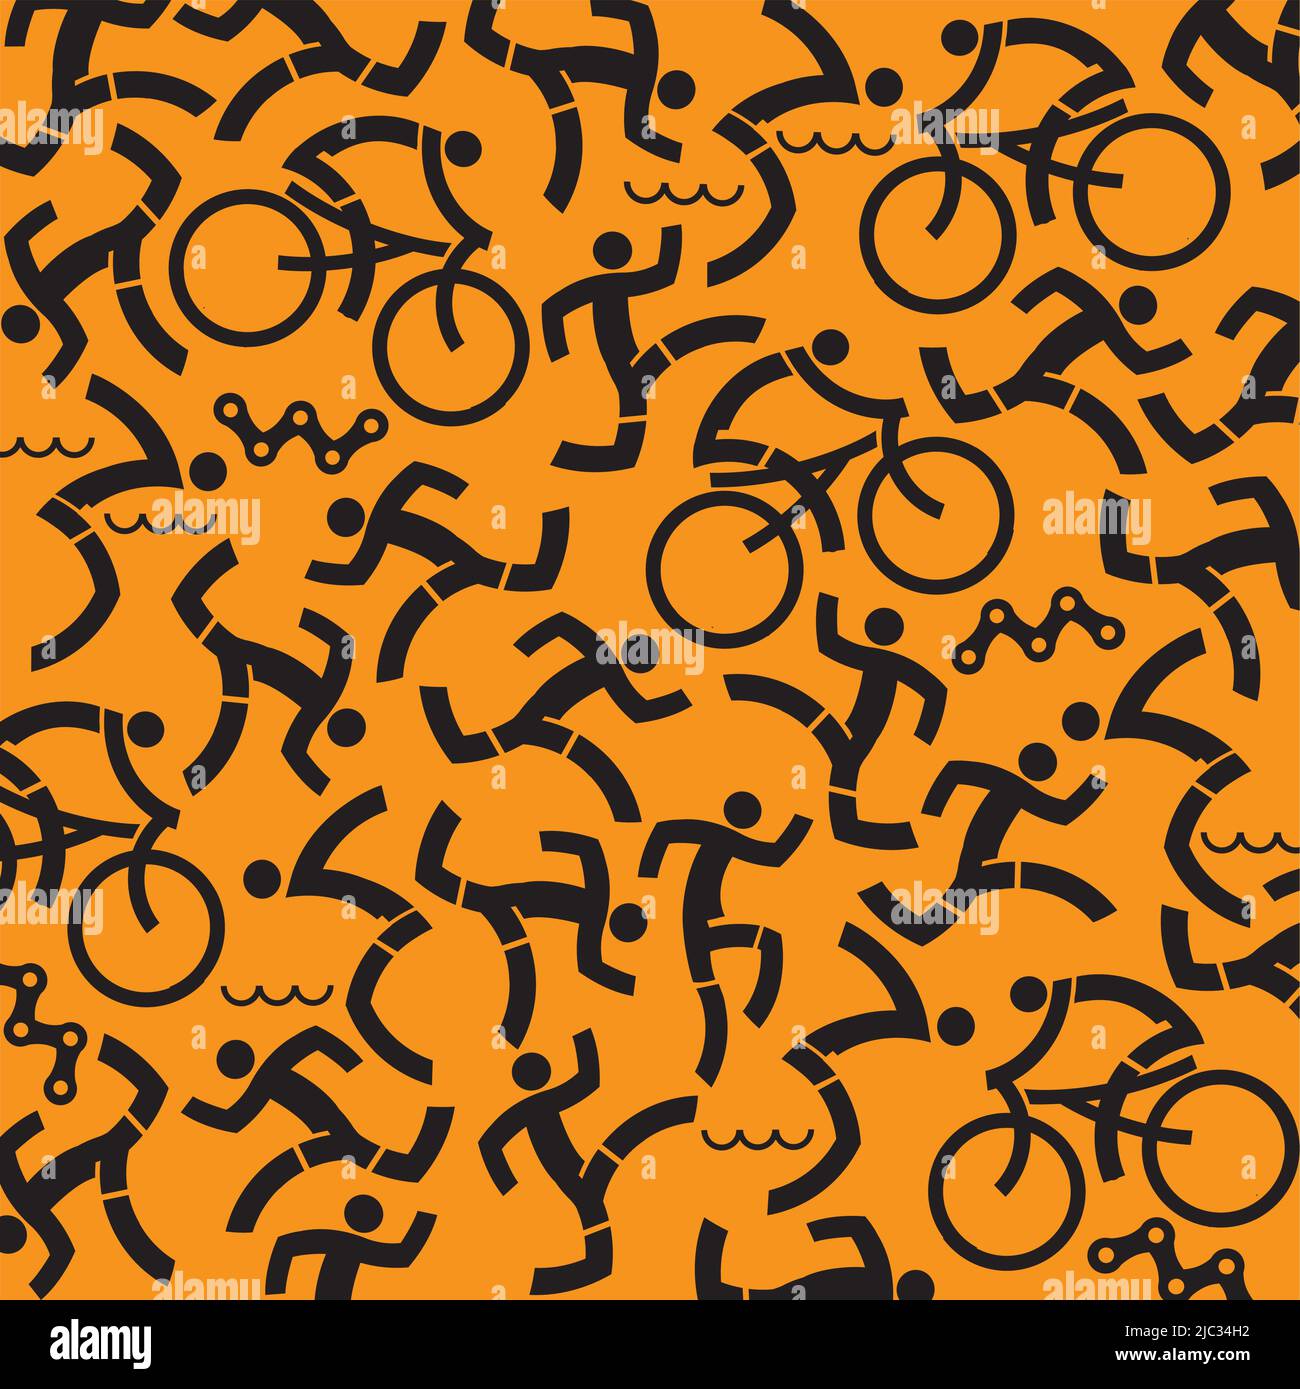 Triathlon icons background. Orange Background with black icons of triathlon athletes. Vector available. Stock Vector